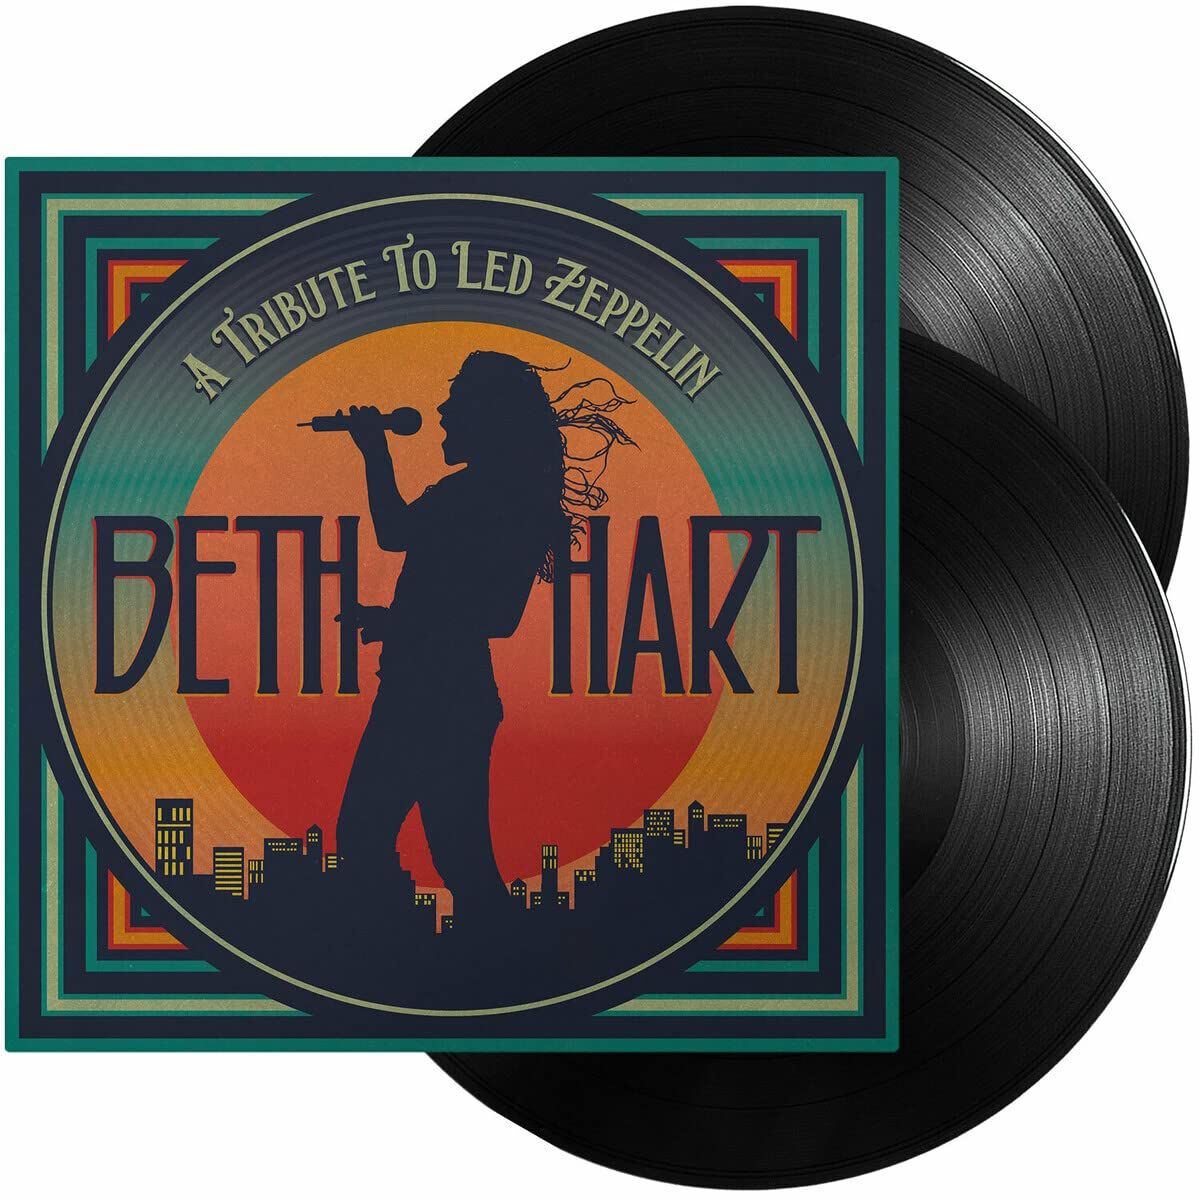 Image of Beth Hart A tribute to Led Zeppelin 2-LP schwarz